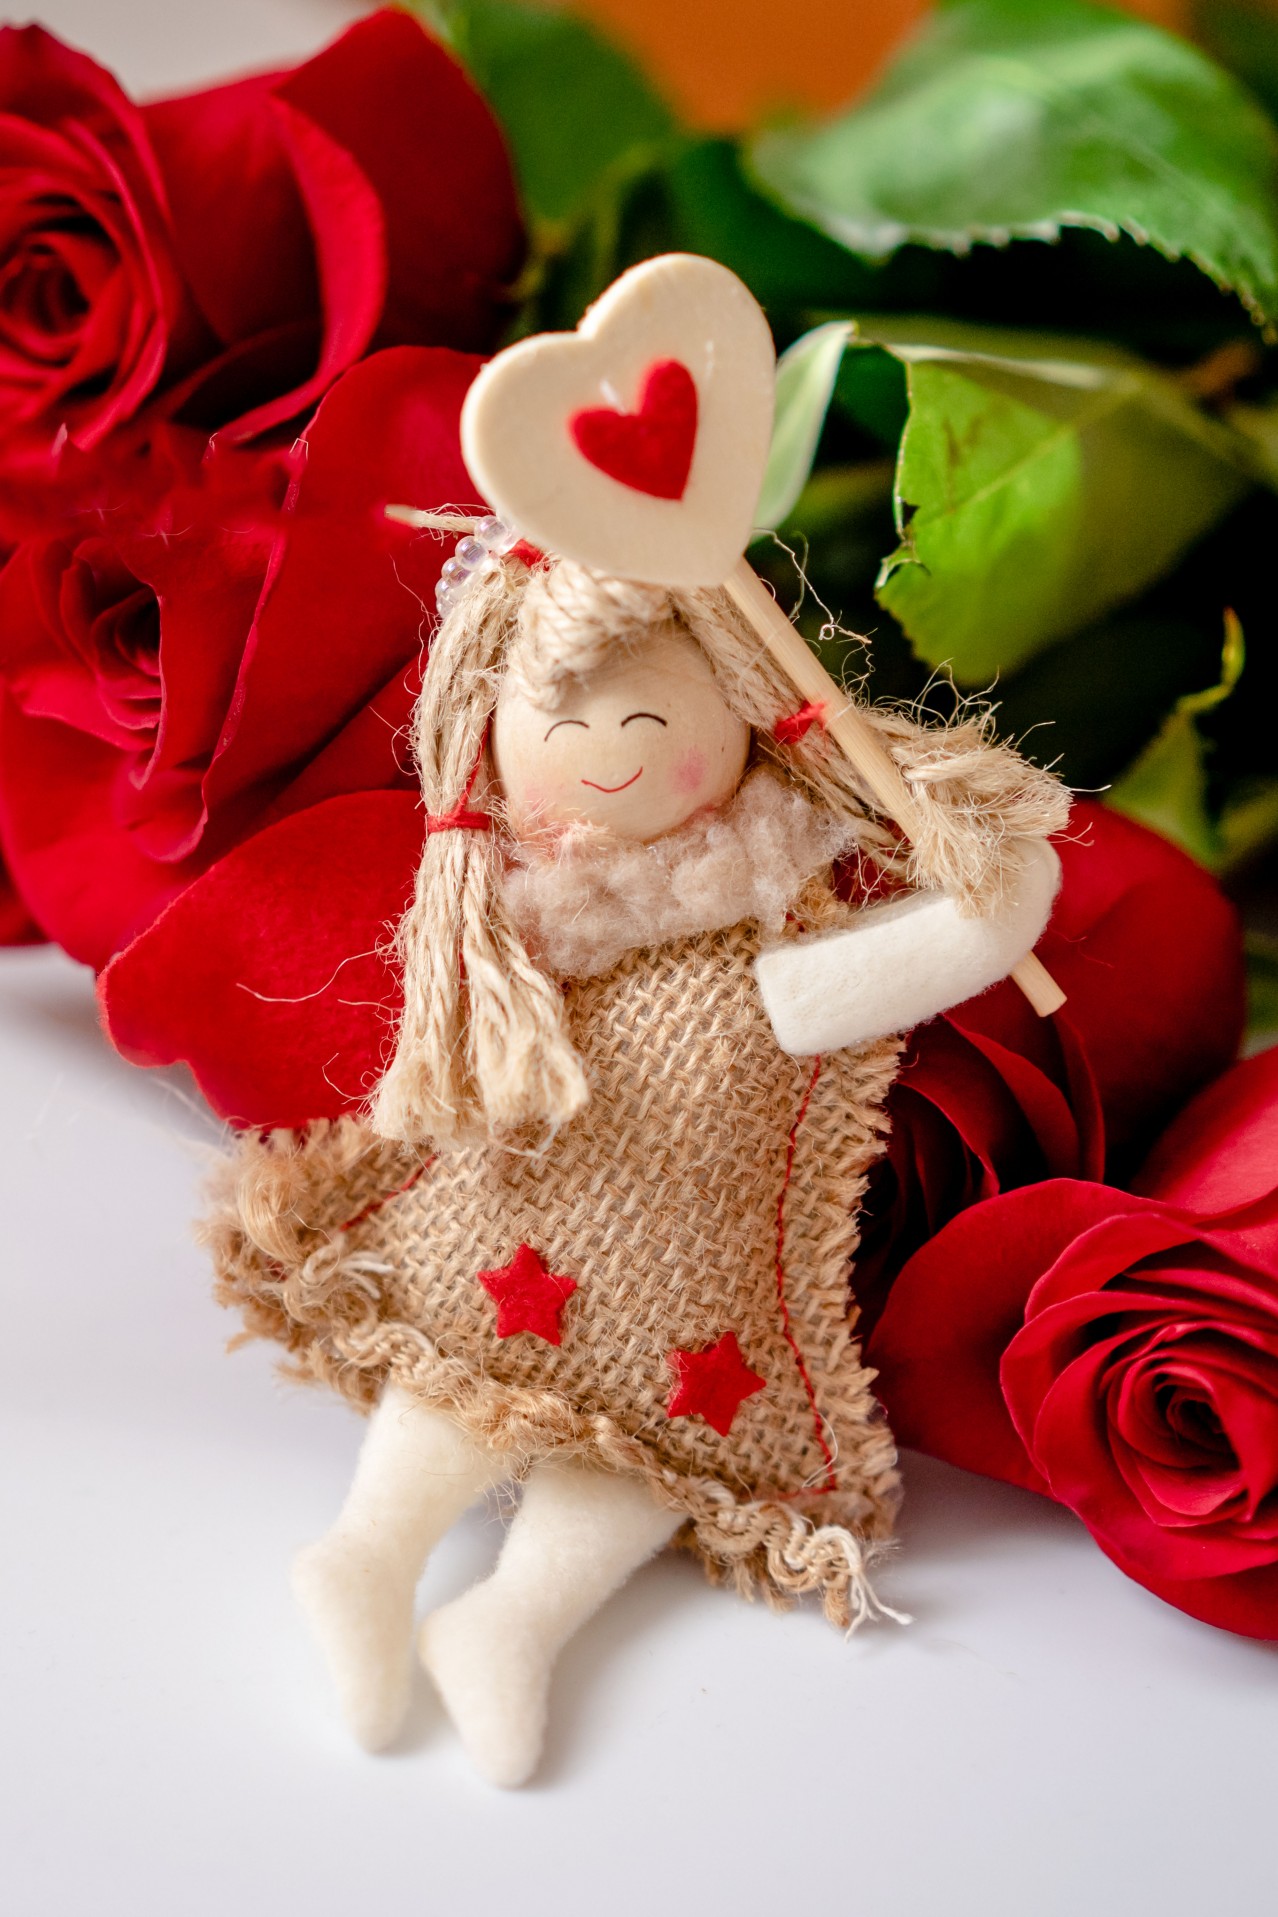 A Bouquet of Red Roses with a Decorative Angel